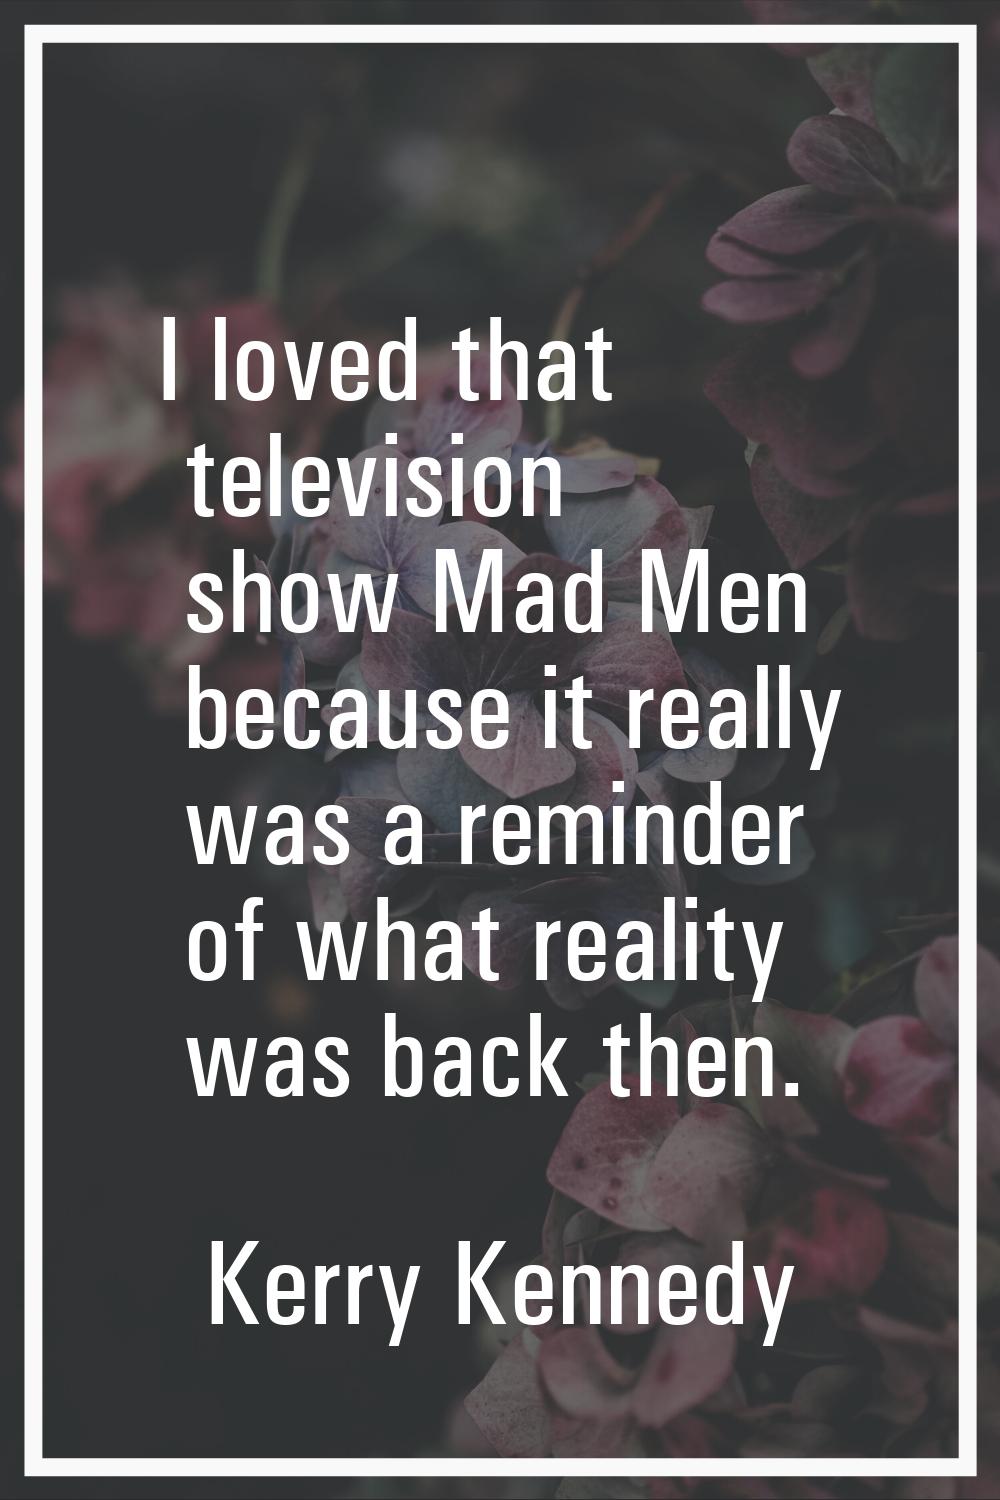 I loved that television show Mad Men because it really was a reminder of what reality was back then